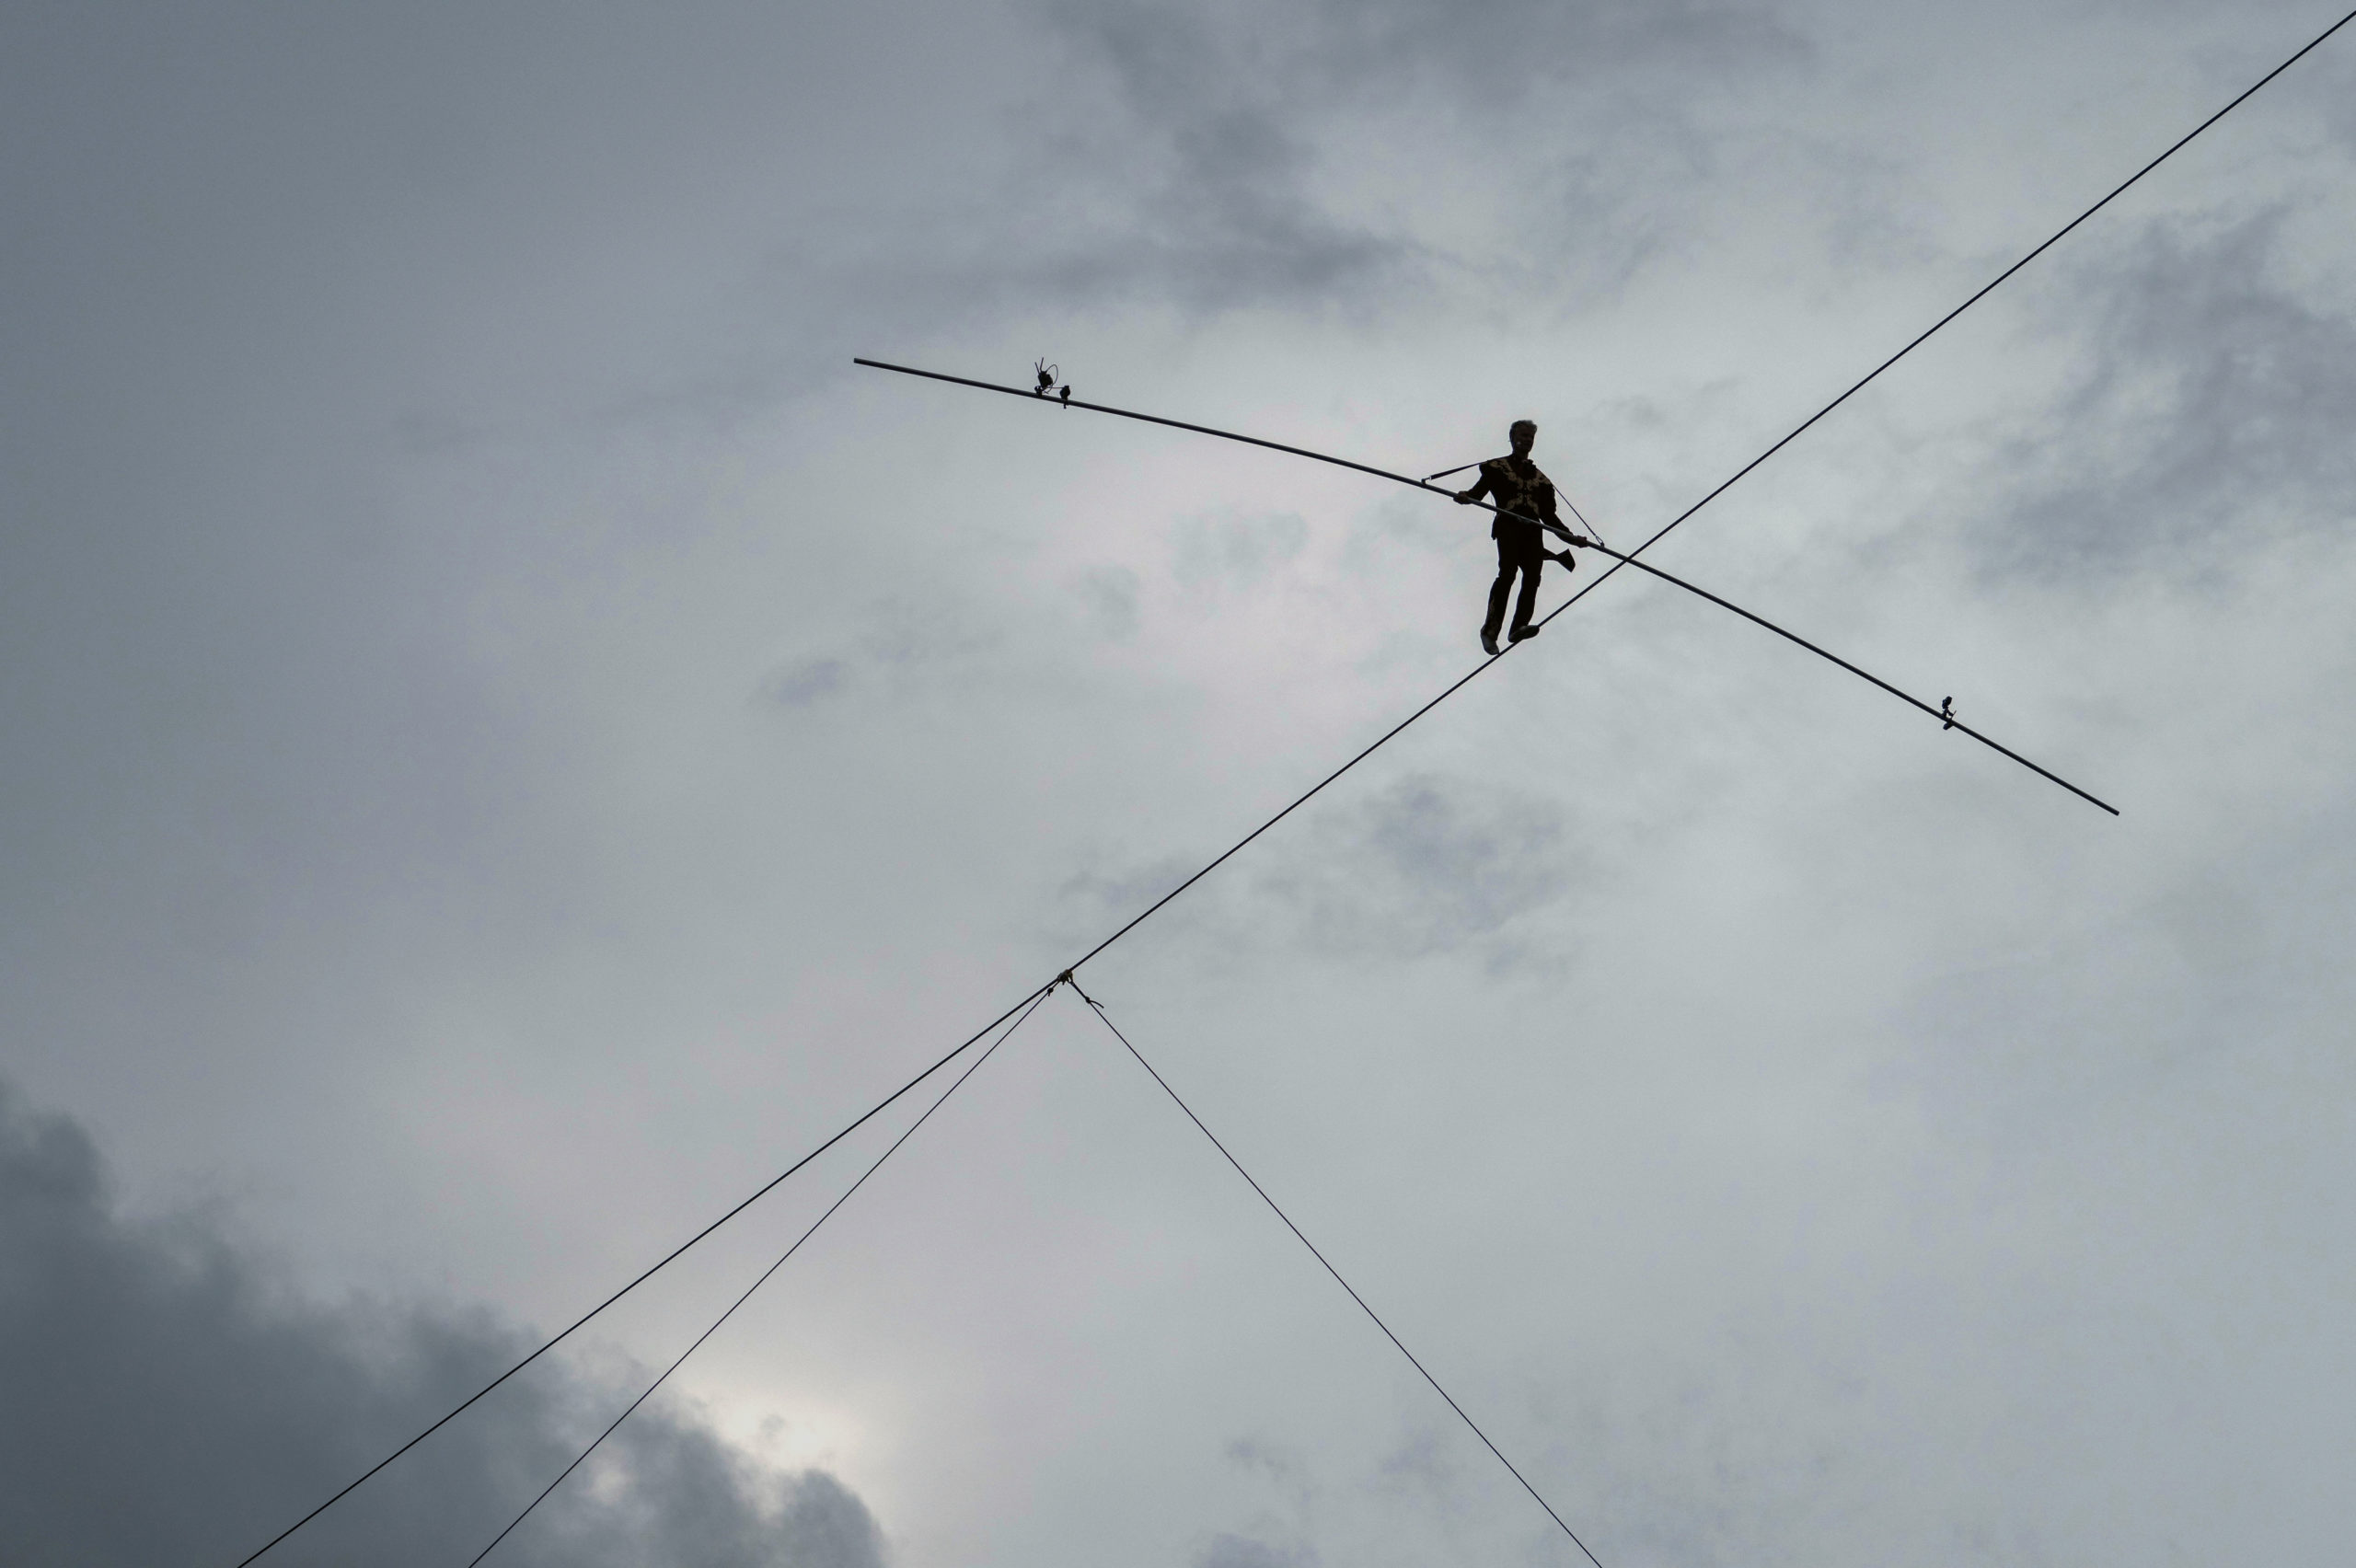 Acrobat Laszlo Simet walks on a wire rope to mark the World Circus Day in Budapest